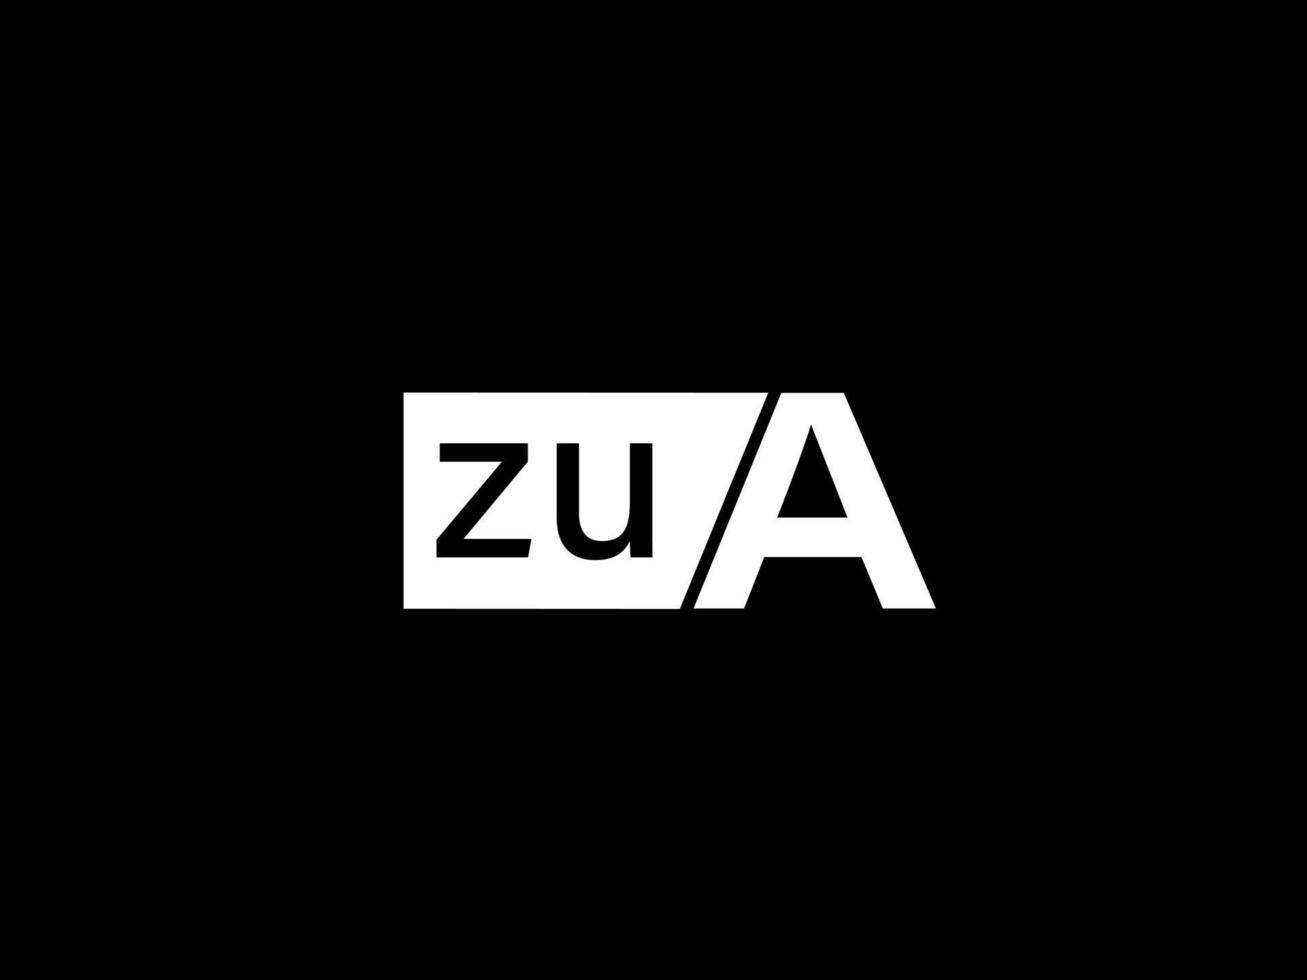 ZUA Logo and Graphics design vector art, Icons isolated on black background